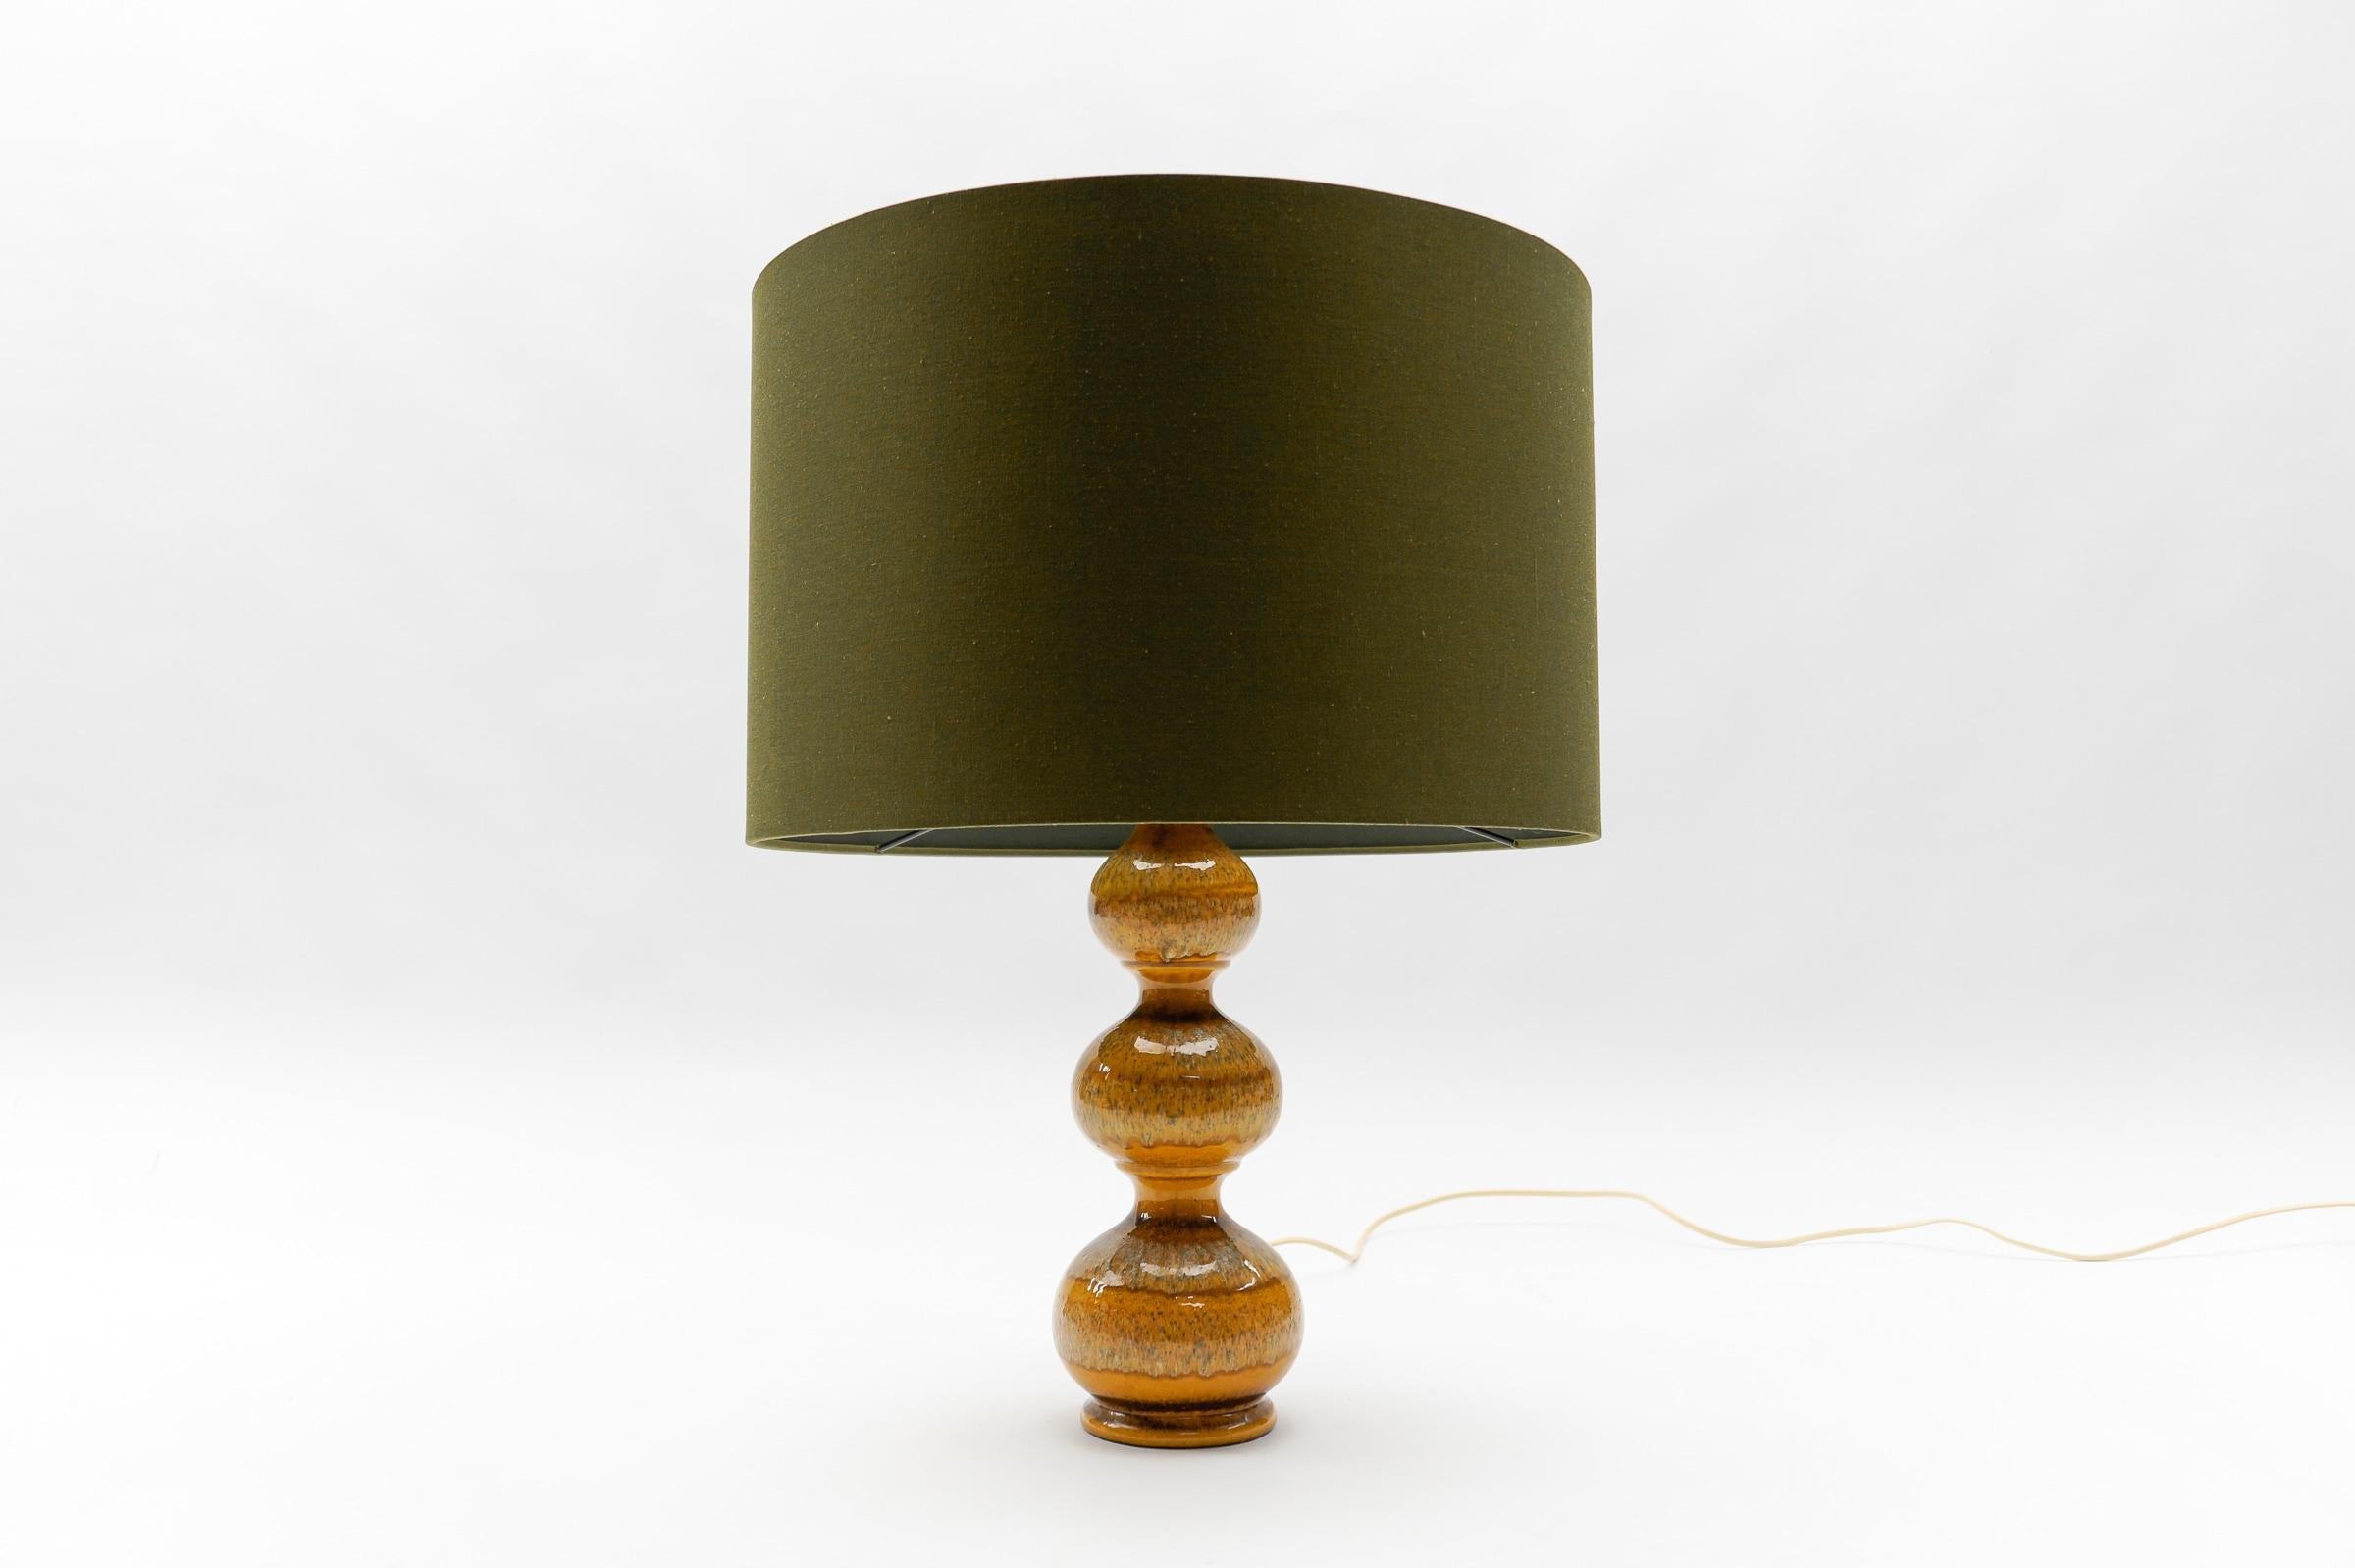 These ceramic table lamp was designed in the 1960s. 

We have a total of six table lamp bases from the Kaiser Leuchten Bubble ceramic series from the 1960s. 

Three large orange ones, one slightly smaller one and two larger green ones. 

The